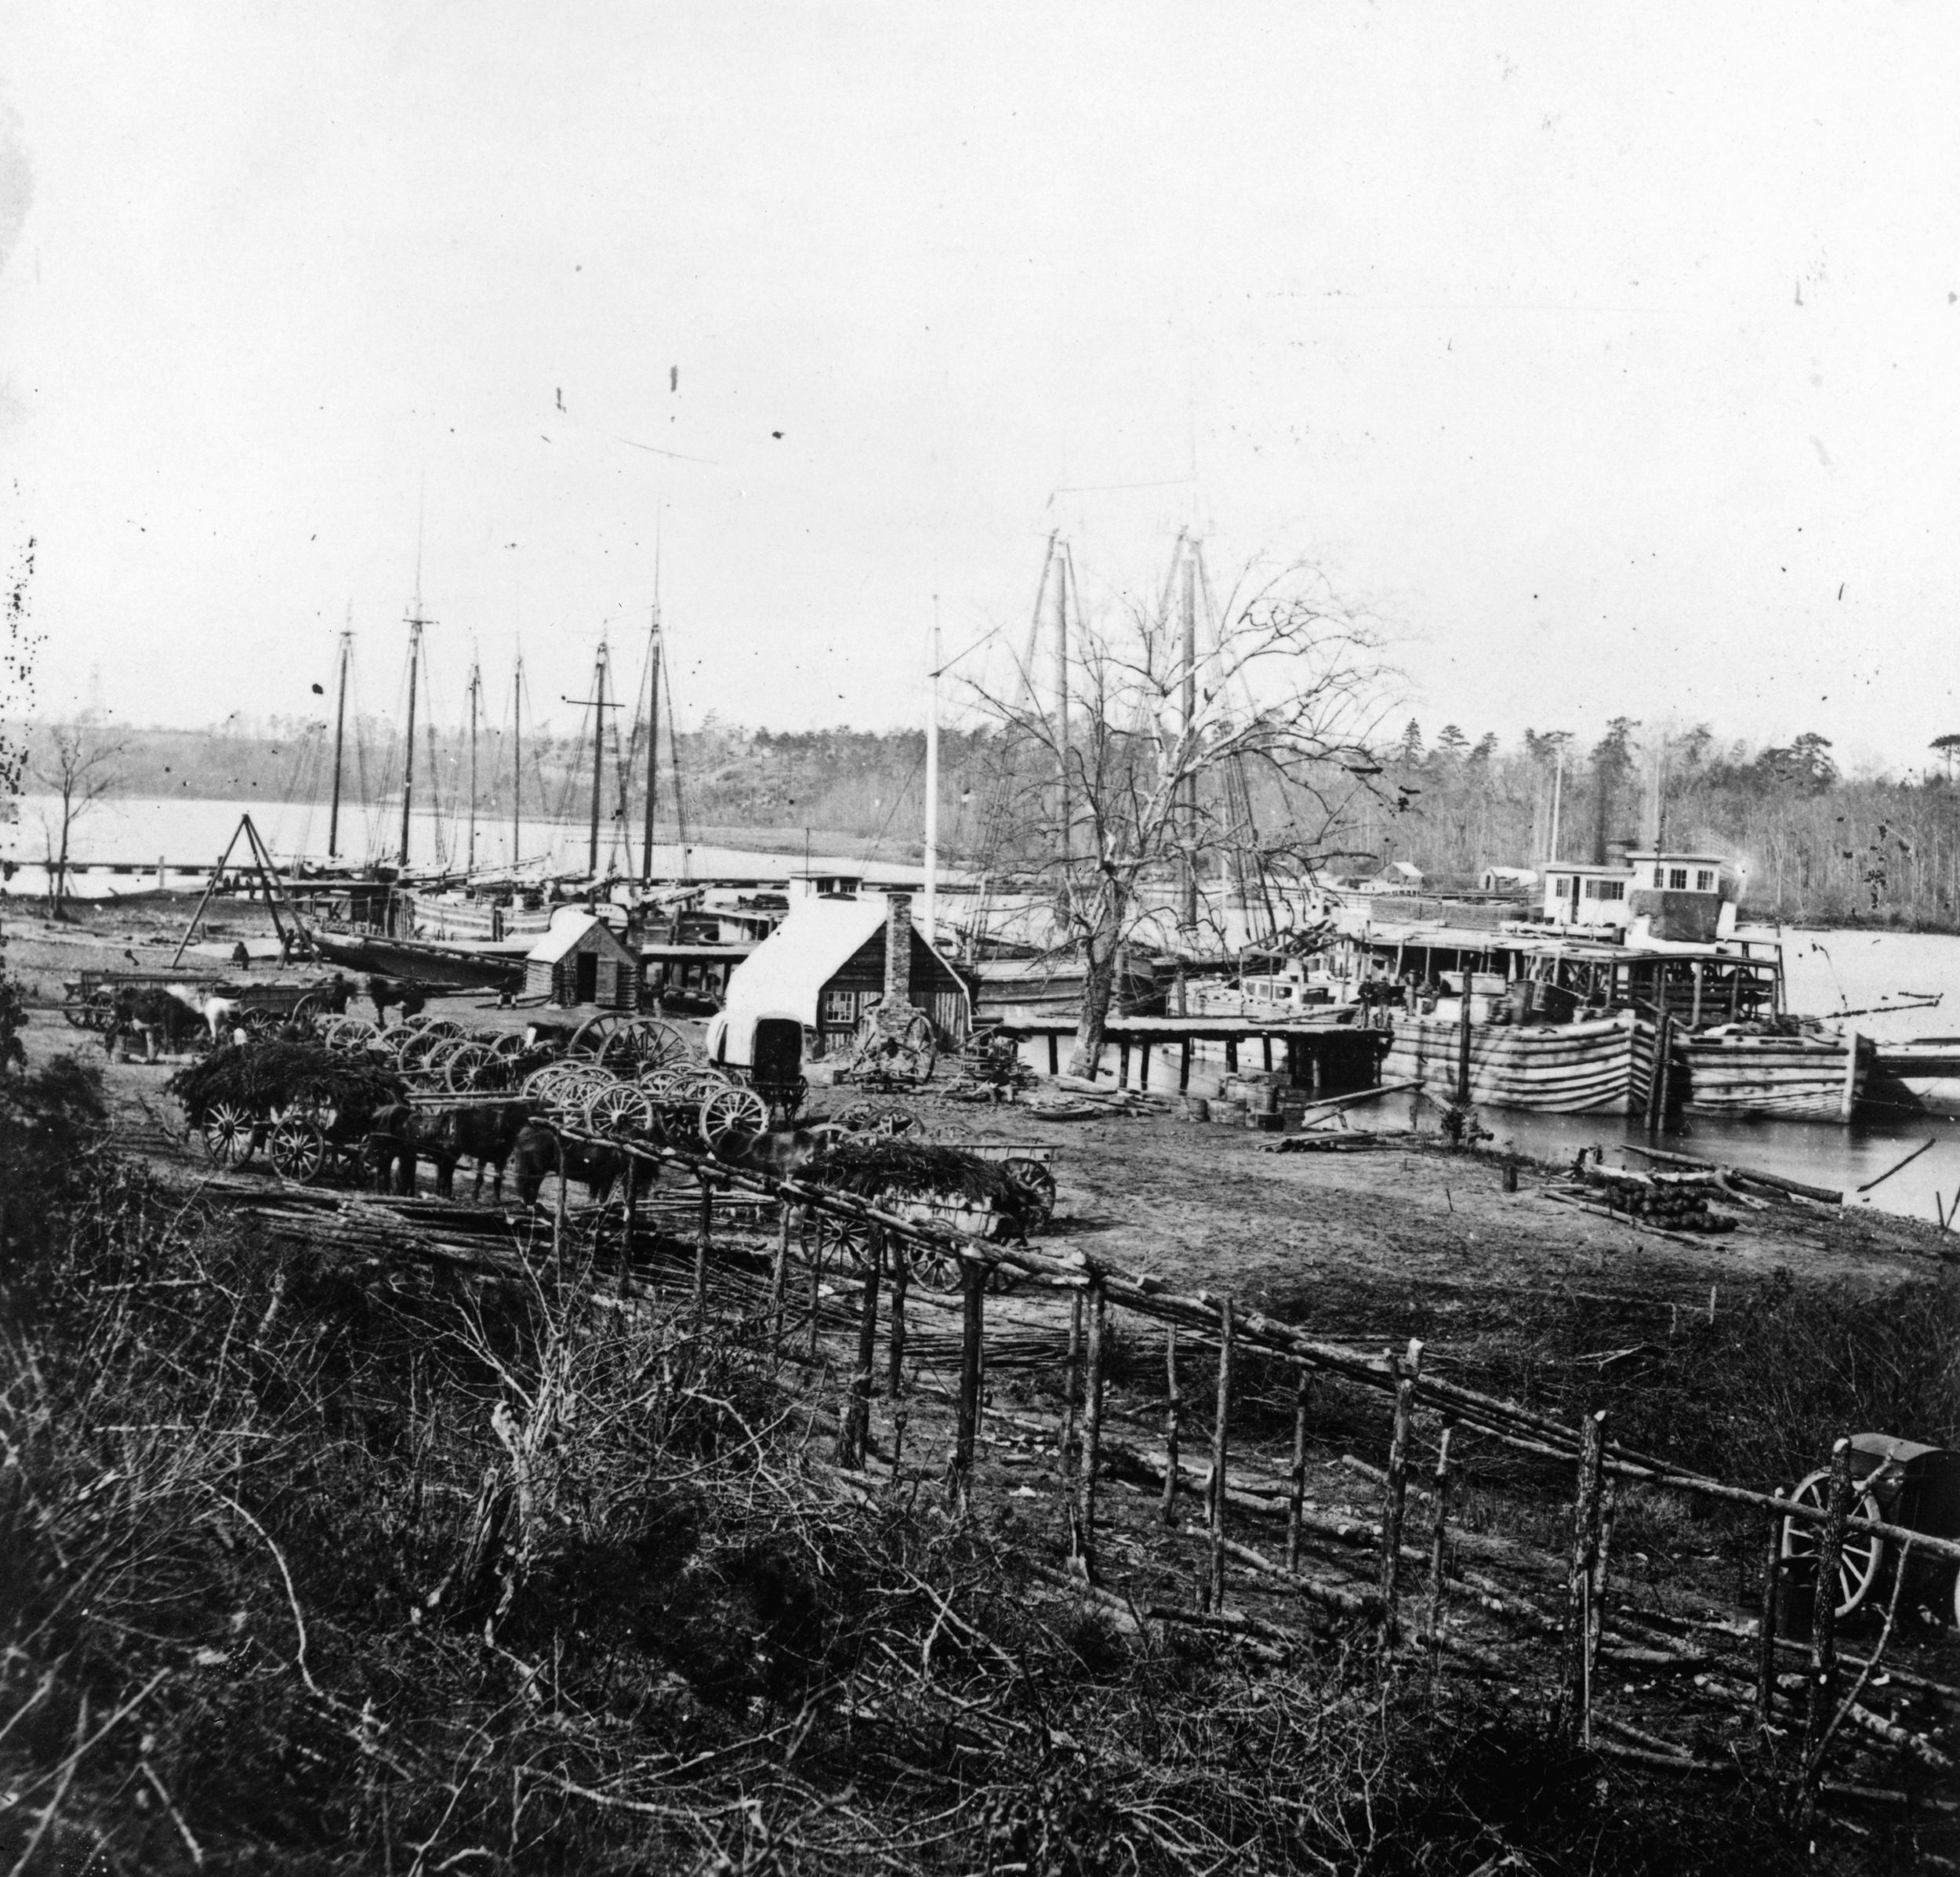 Matthew Brady’s photograph of Broadway Landing was taken at the time of the Battle of the Crater. Cobb’s Hill Signal Tower and the pontoon bridge are clearly visible on the left.